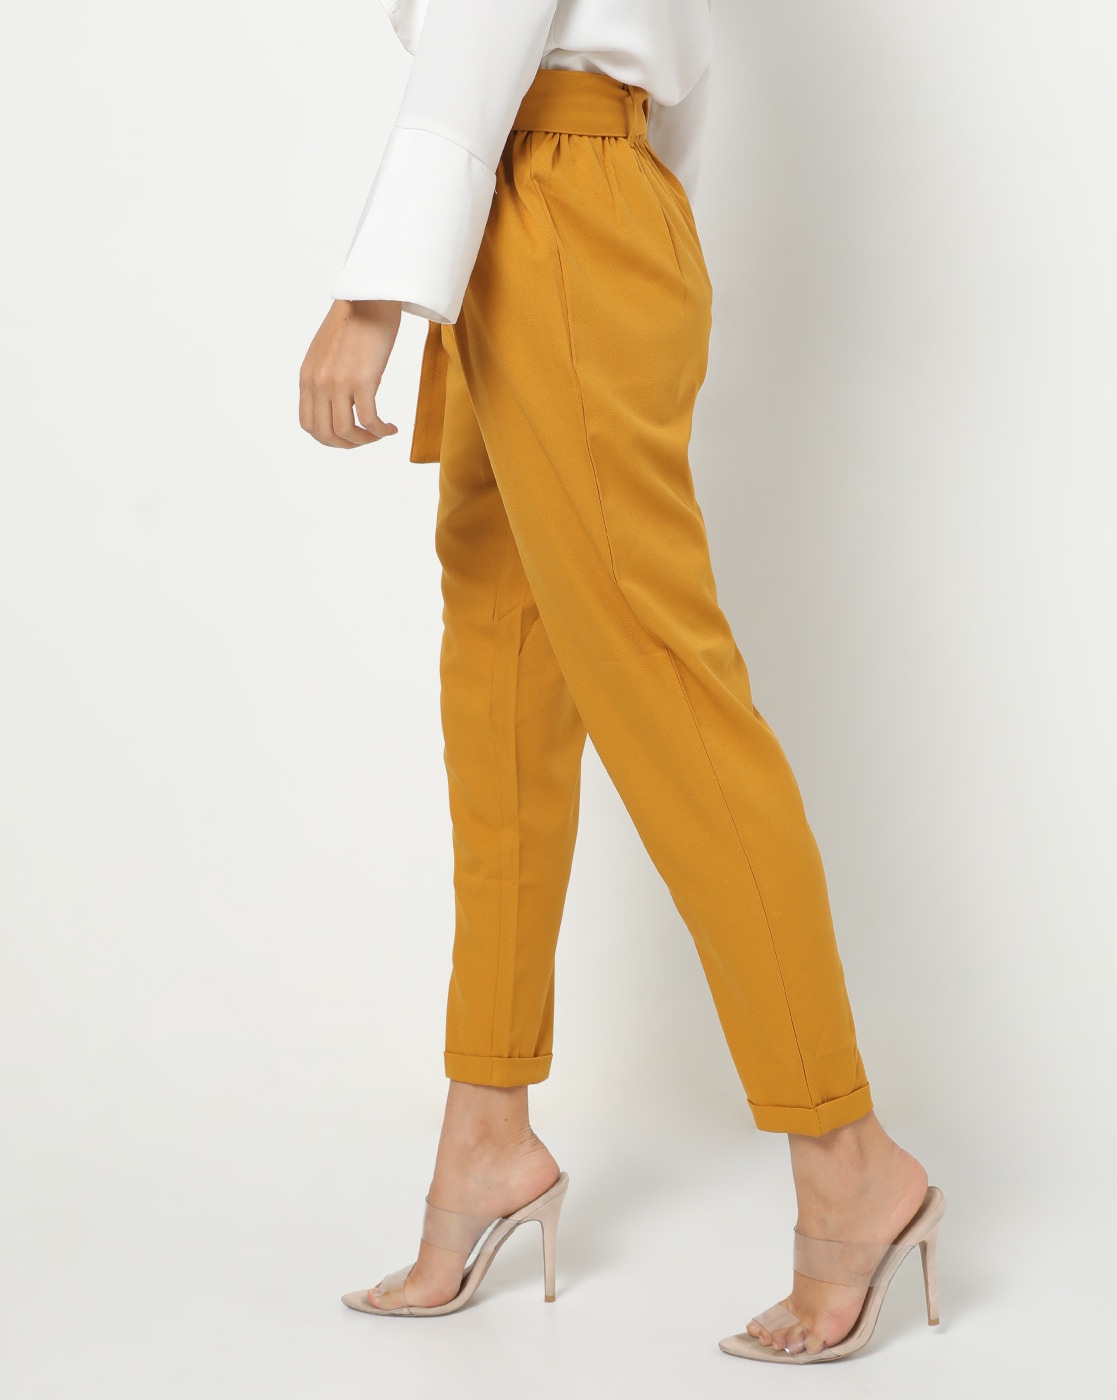 Mustard Yellow Suit Trousers - Stylish and Versatile